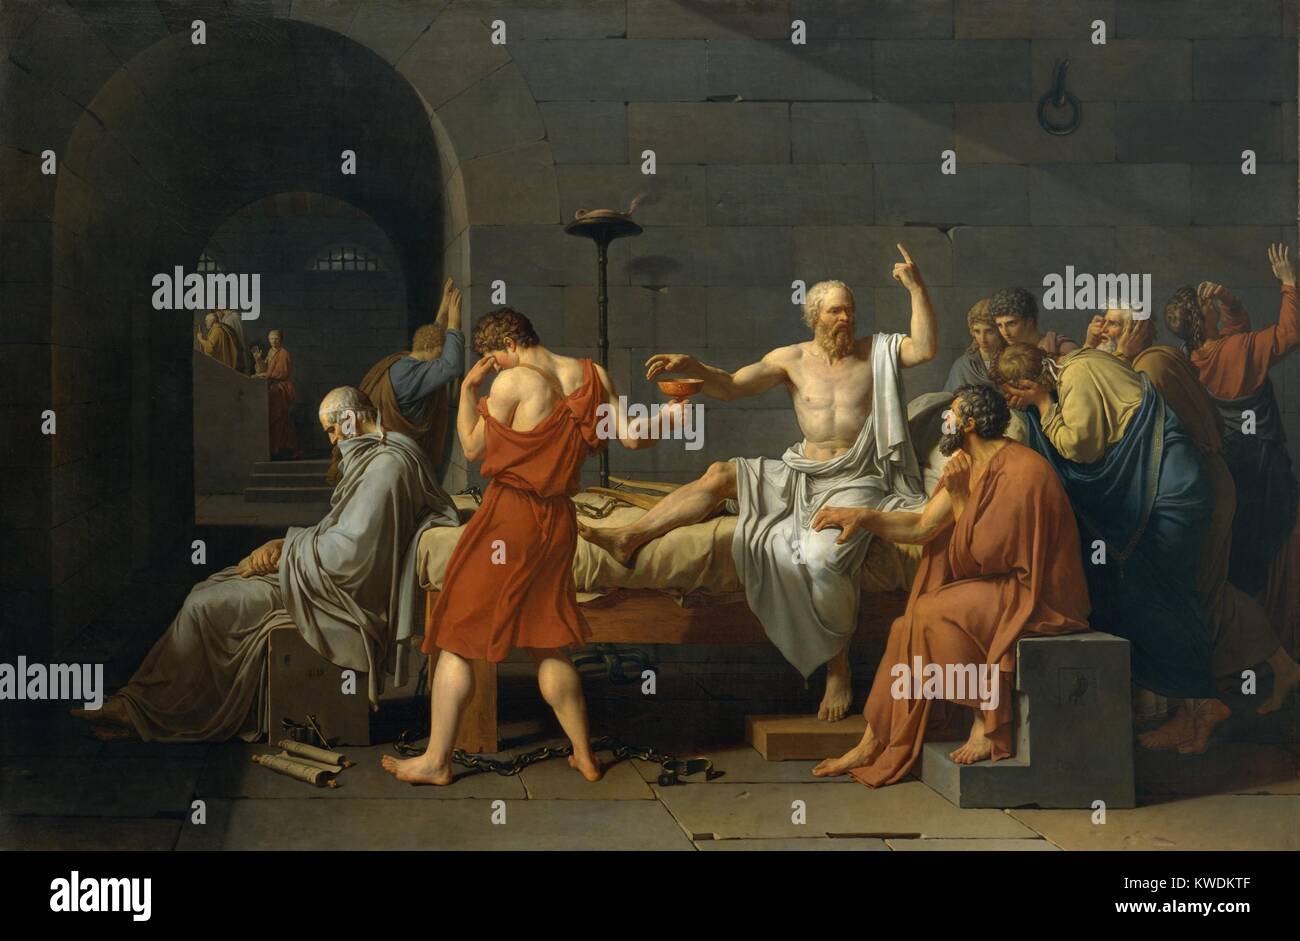 THE DEATH OF SOCRATES, by Jacques Louis David, 1787, French Neoclassical painting, oil on canvas. Greek Classical philosopher Socrates about to drink poison hemlock as the price of maintaining his beliefs. Most of his disciples are grieving, except for the meditative Plato seated on left. Apollodorus, is behind Plato, leaning against the wall while Crito grasps Socratess thigh (BSLOC_2017_9_145) Stock Photo